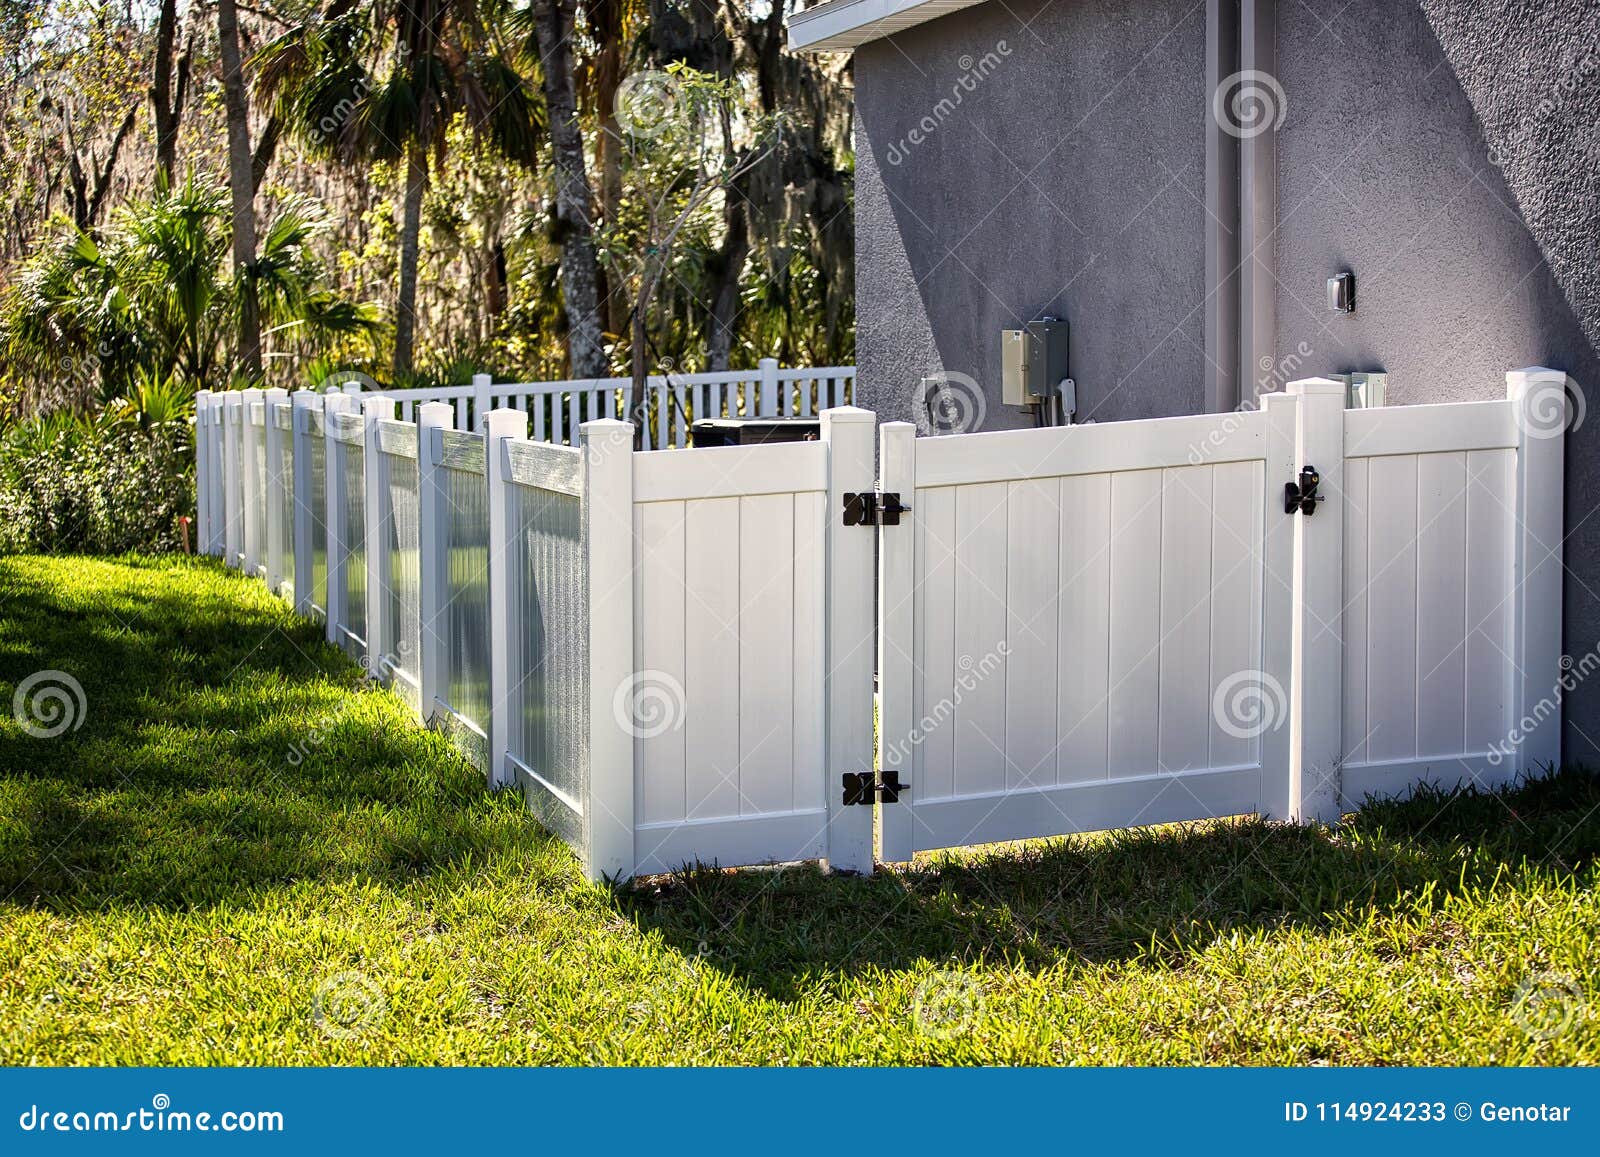 solid privacy vinyl fence